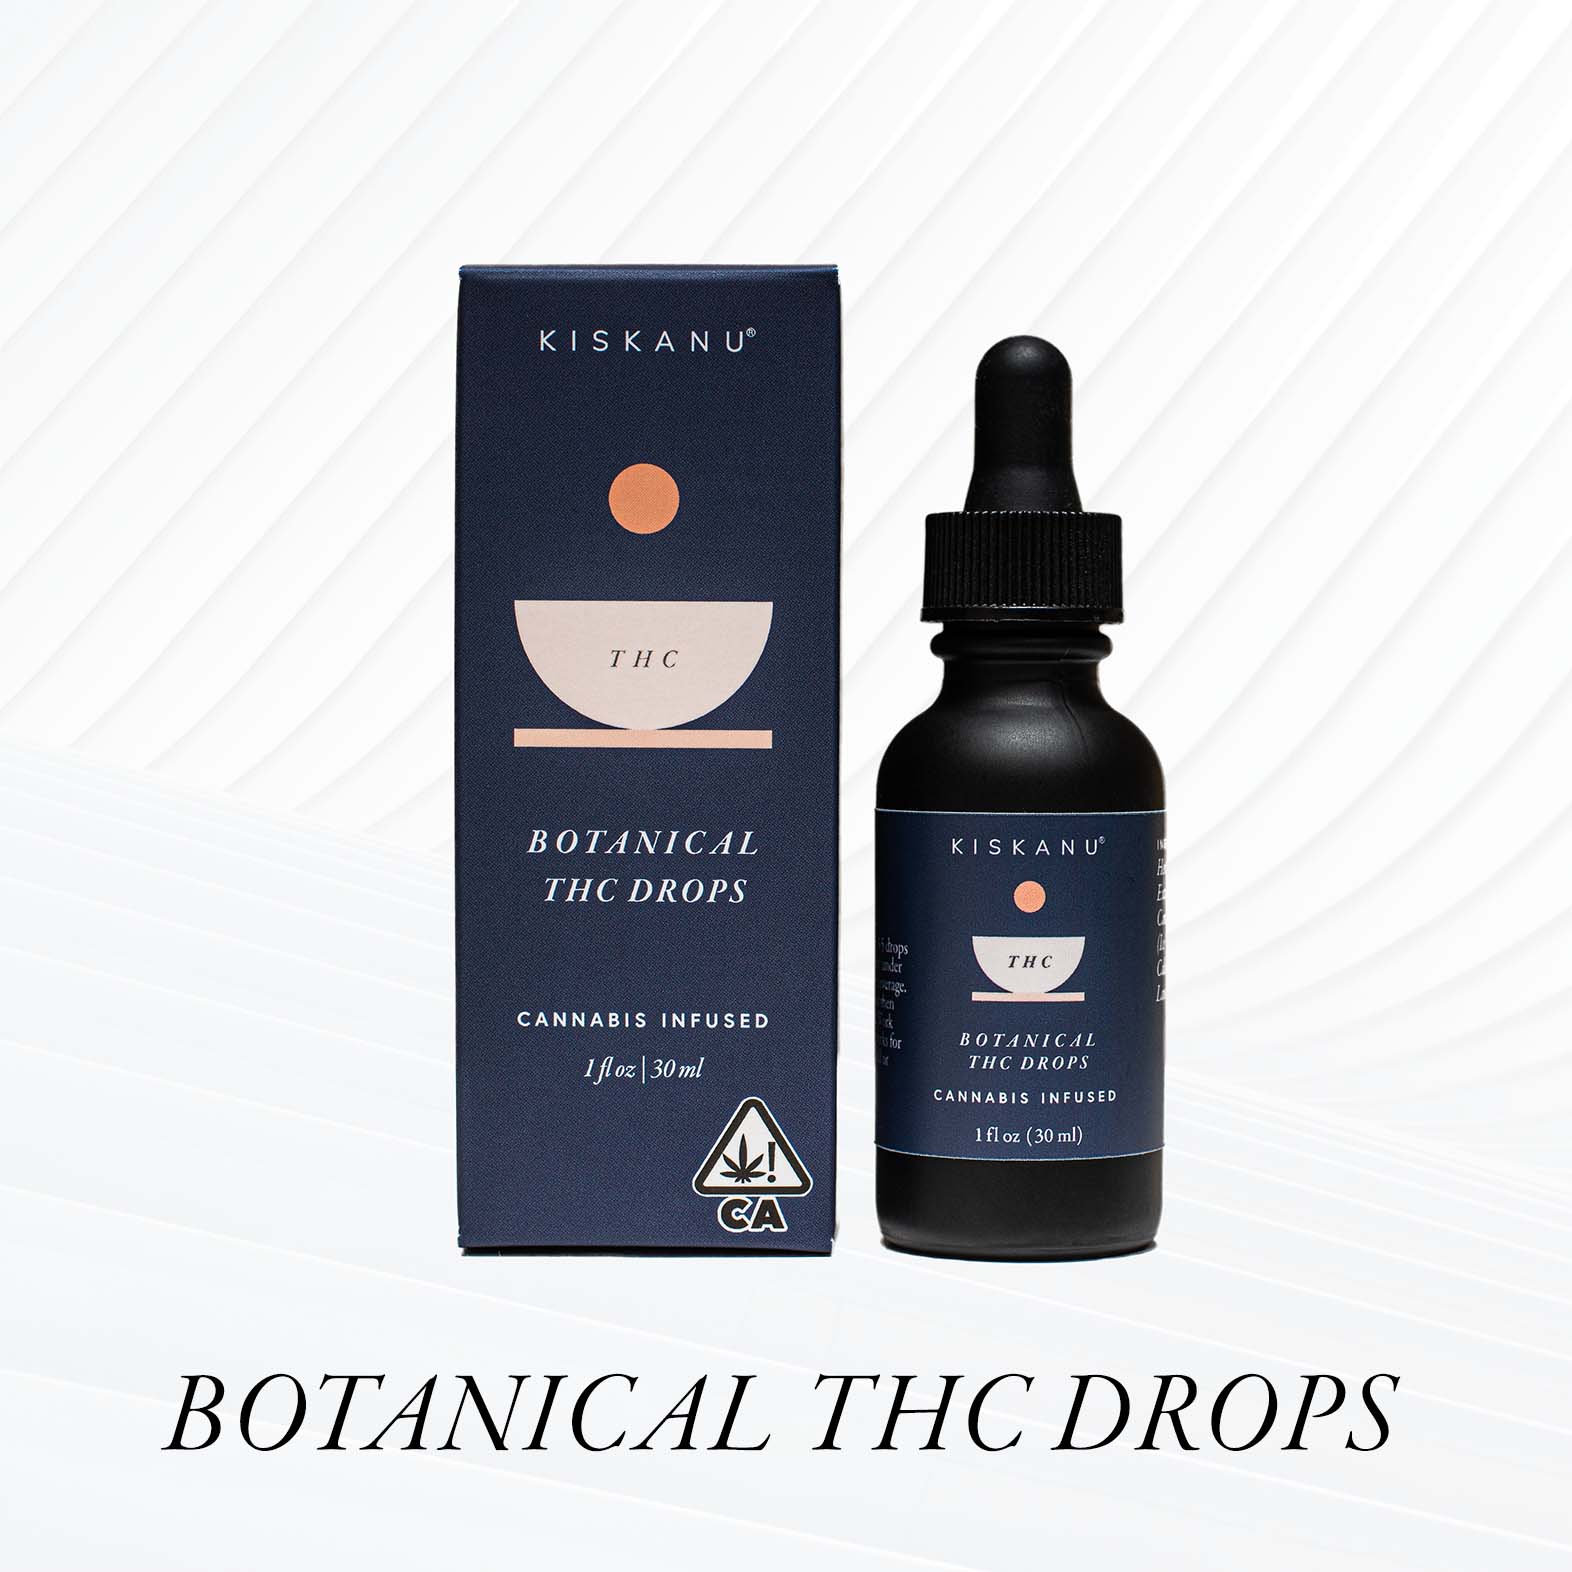 PRODUCT GRAPHIC - BOTANICAL THC DROPS